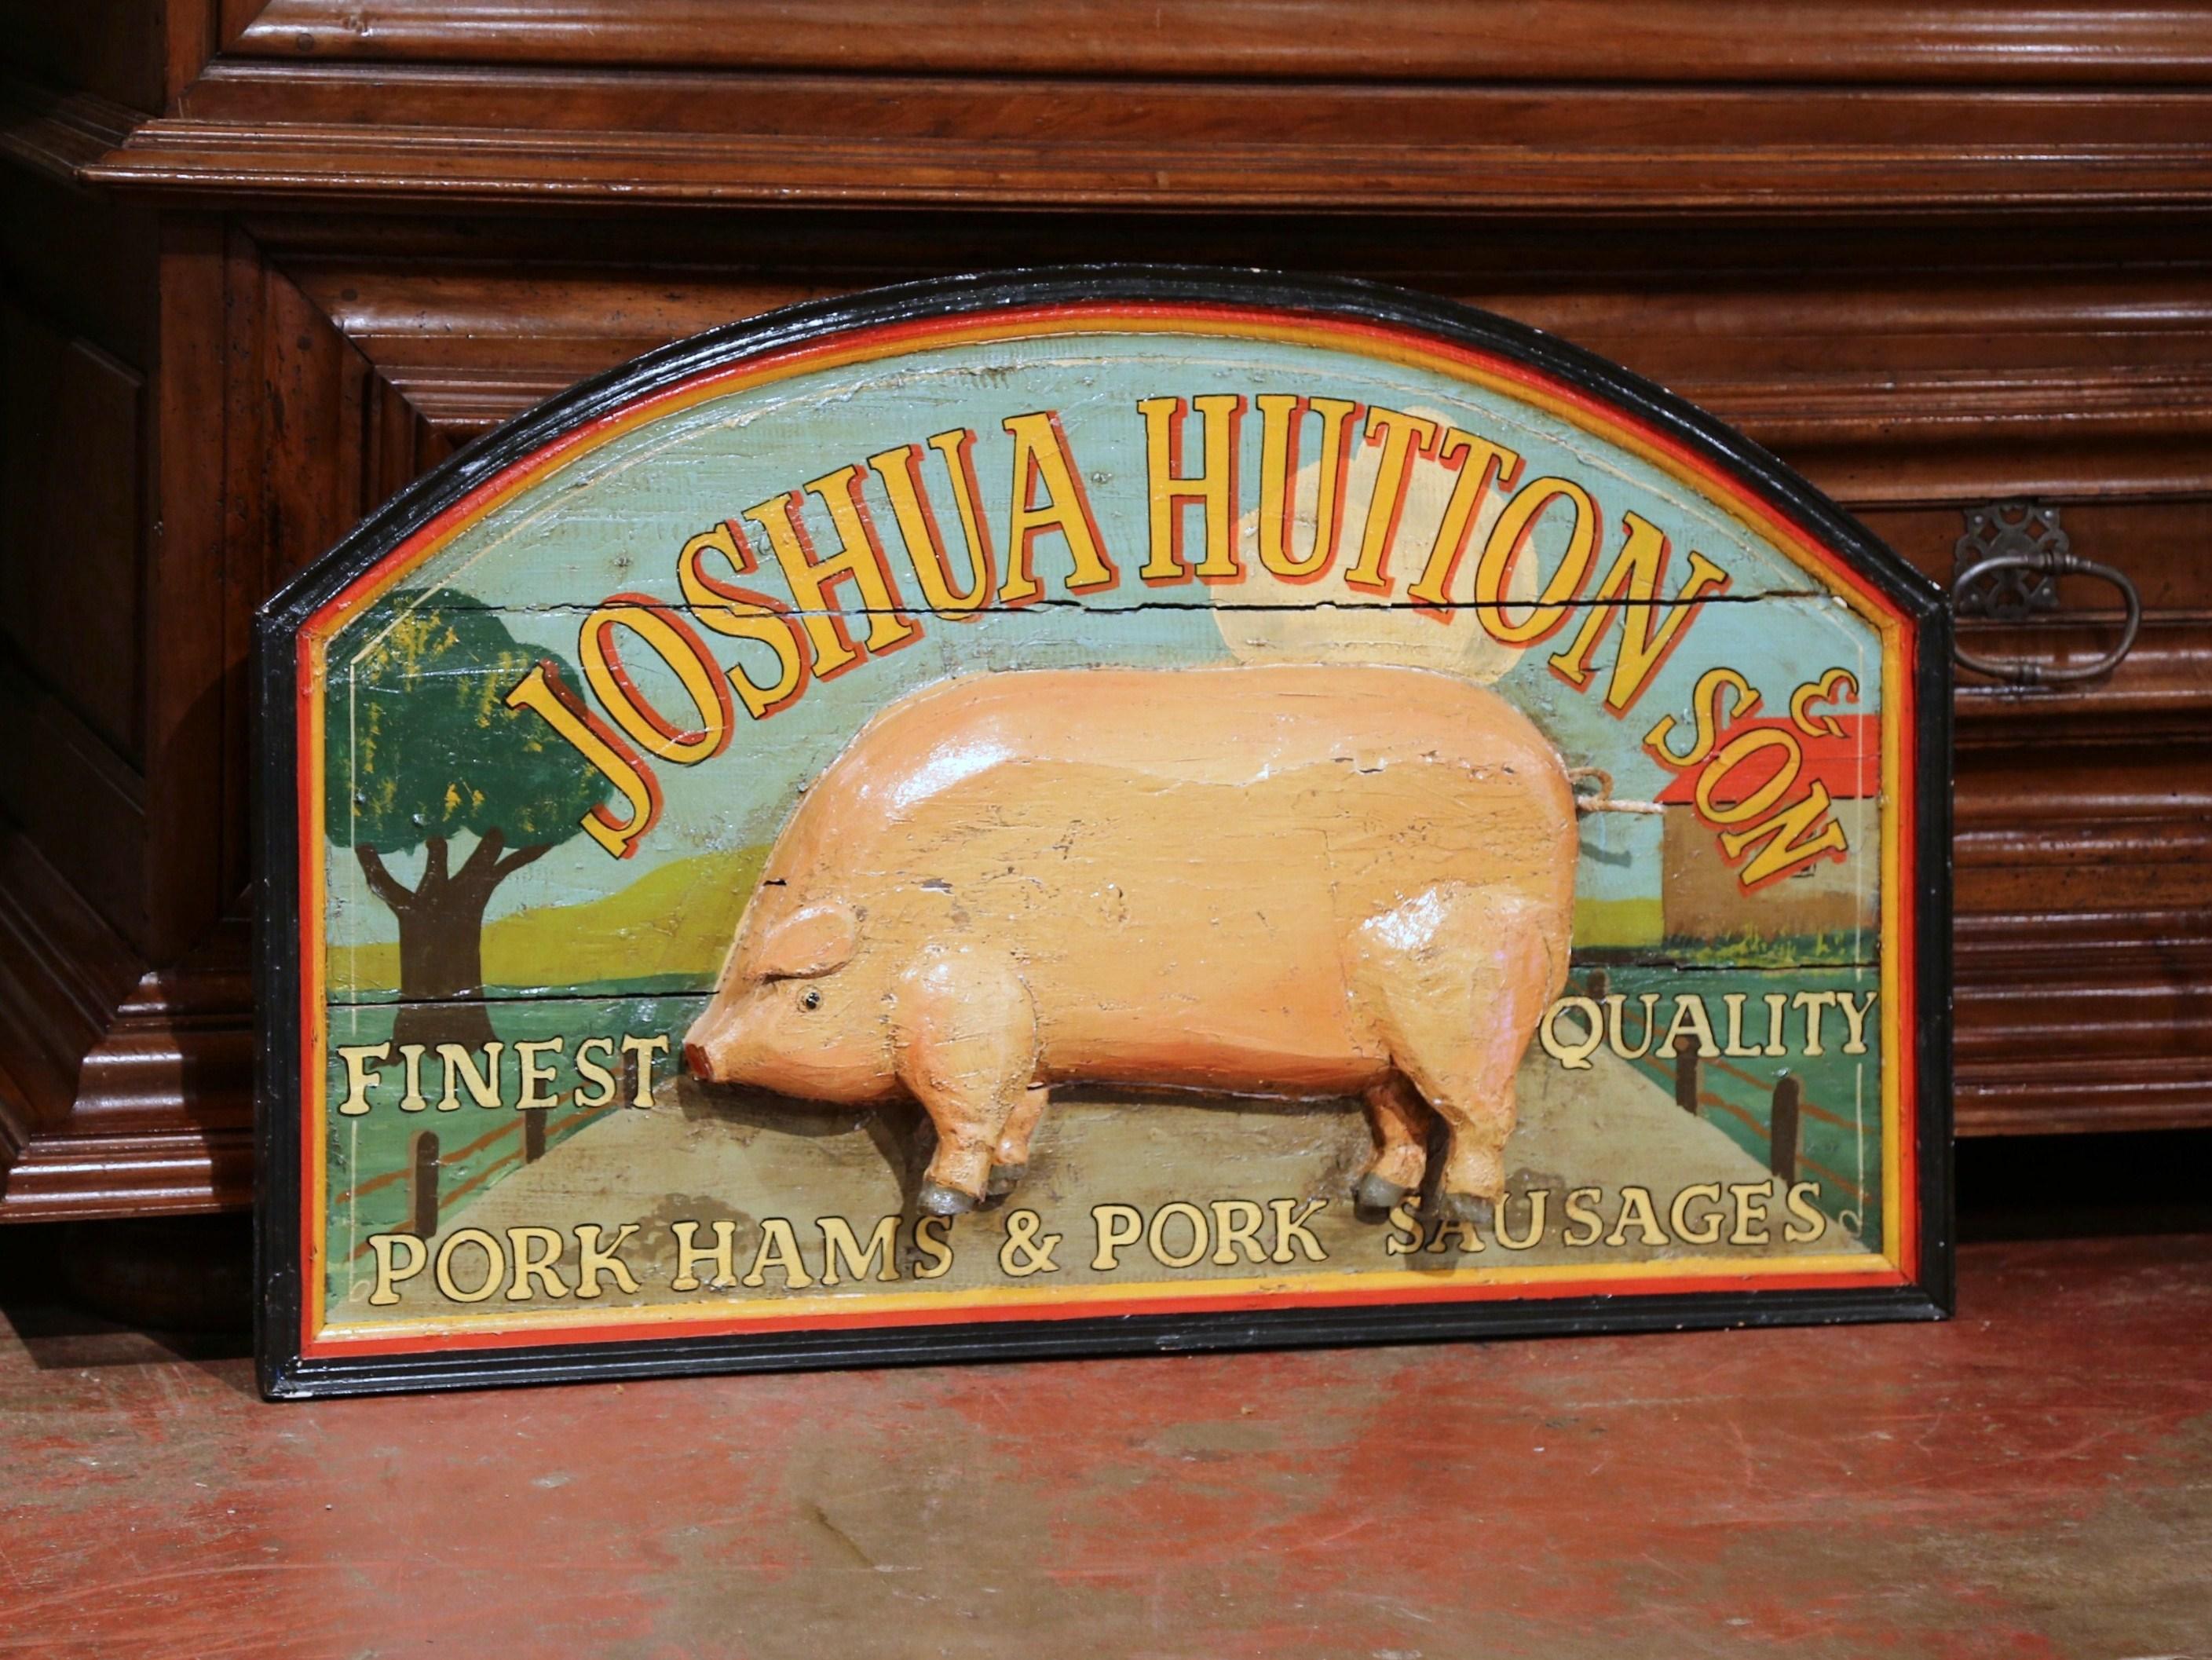 Add charm and color to your kitchen with this antique arched butcher sign. Crafted in England, circa 1880, the colorful, hand-painted, wall hanging piece features a carved pig figure in the centre with trees and a pasture scene in the background.